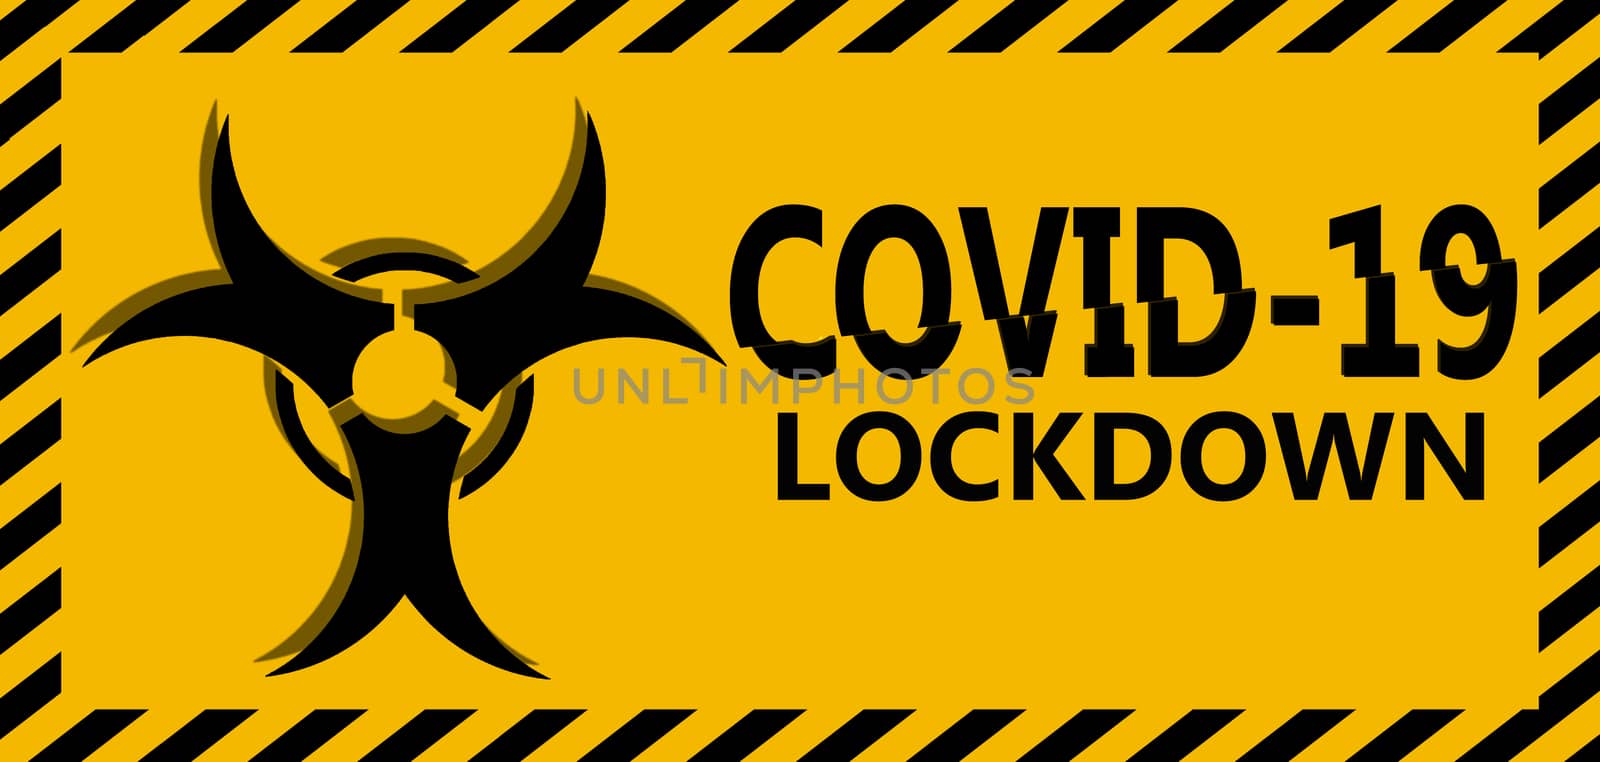 COVID-19 lockdown with biohazard sign by tang90246